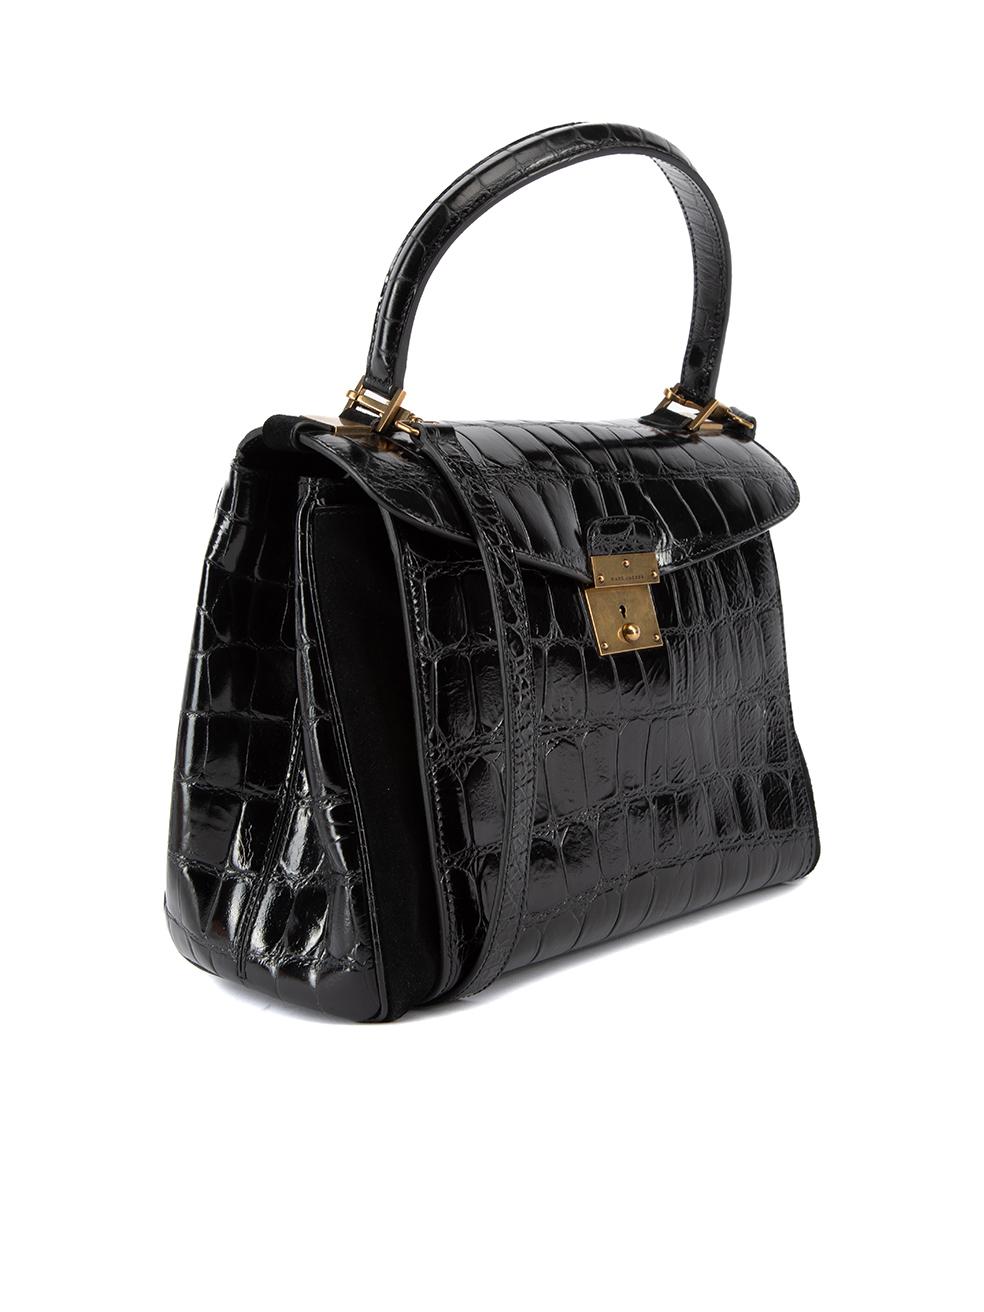 CONDITION is Very good. Hardly any visible wear to bag is evident. There is very minimal wear to the gold/bronze hardware and suede exterior on the sides on this used Marc Jacobs designer resale item. Details Black Exotic leather and suede Large